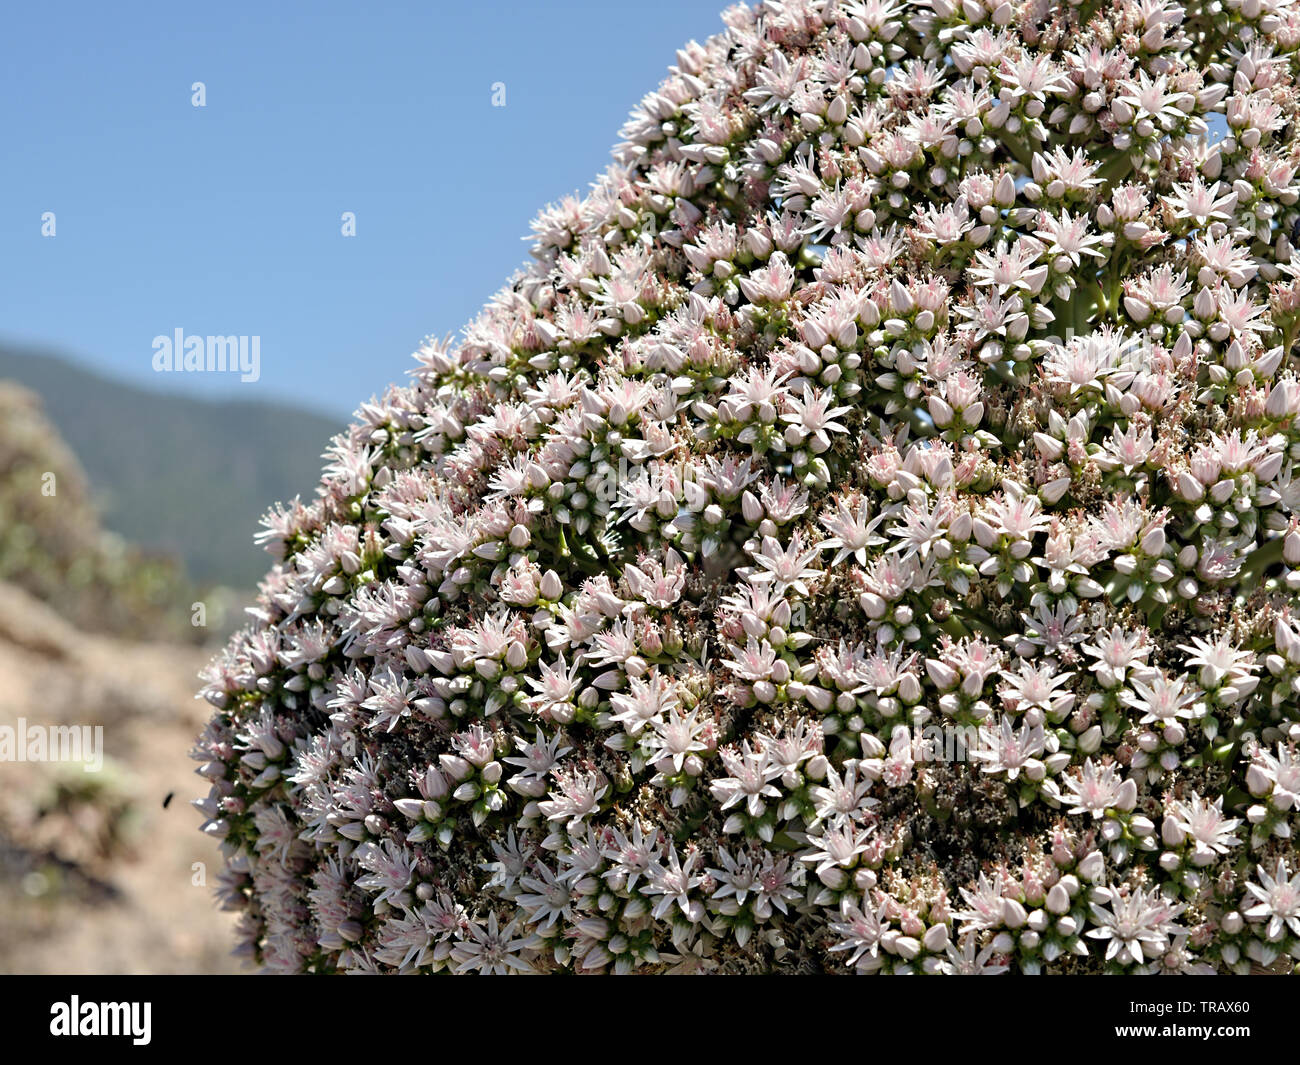 left page detail, detail, from a verode, succulent species fully blossoming on Tenerife, Canary Island. It has thousands of white to pink flowers and Stock Photo